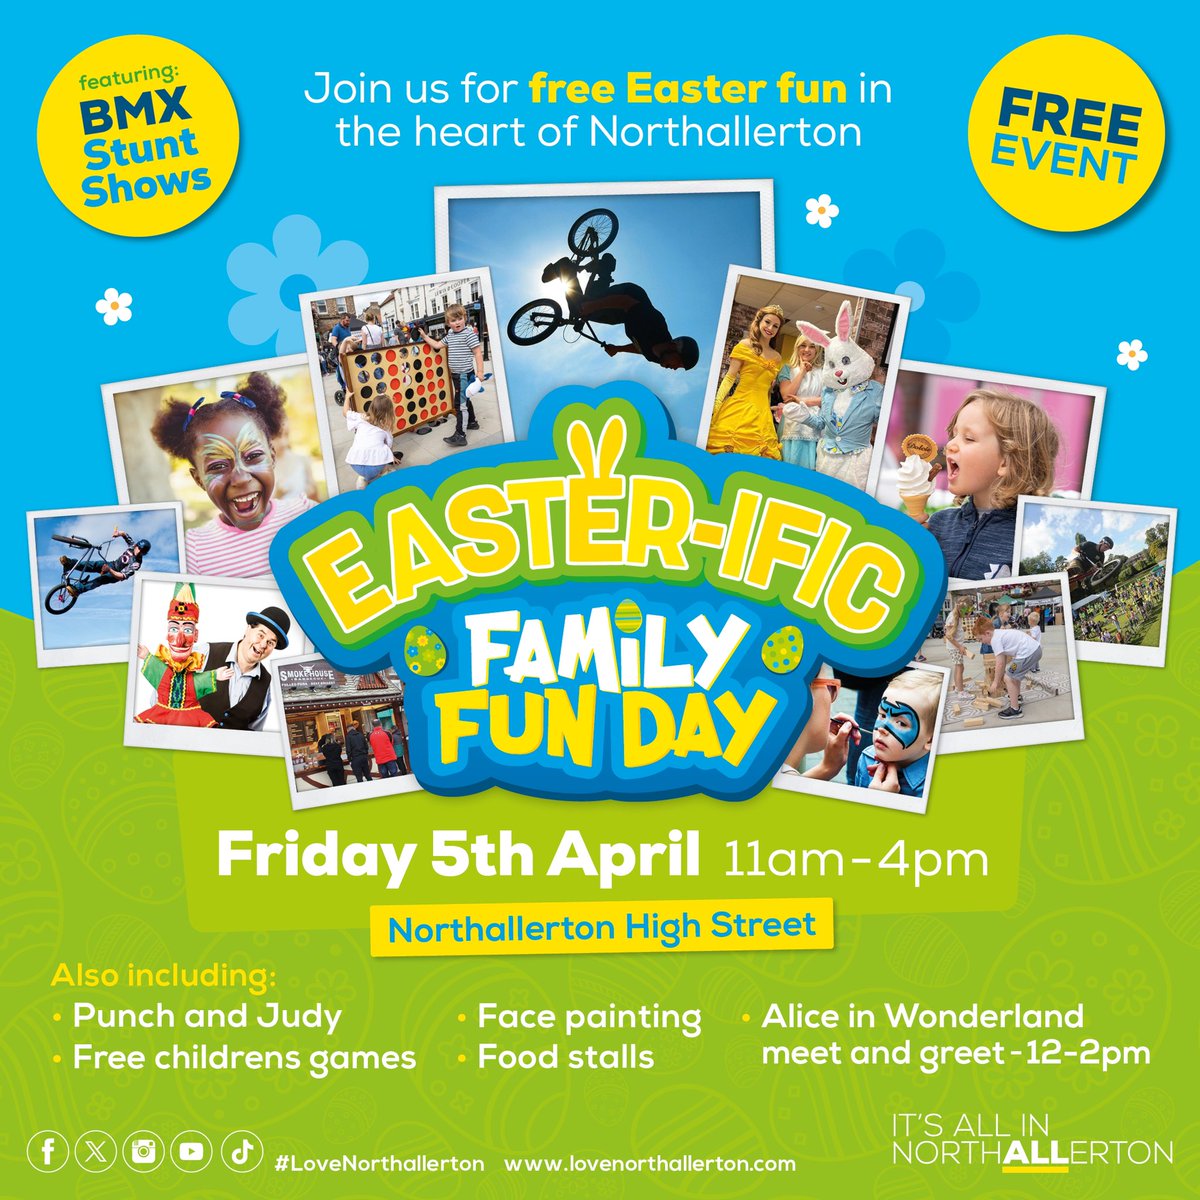 ☀️🐣Our Easter-ific family fun day promises a day of free family entertainment for you and your family! 🐣☀️ 

Friday 5th April 11am - 4pm on Northallerton High Street! 

#lovenorthallerton #itsallinnorthallerton #freefamilyfun #freefamilyevent #easterholidays